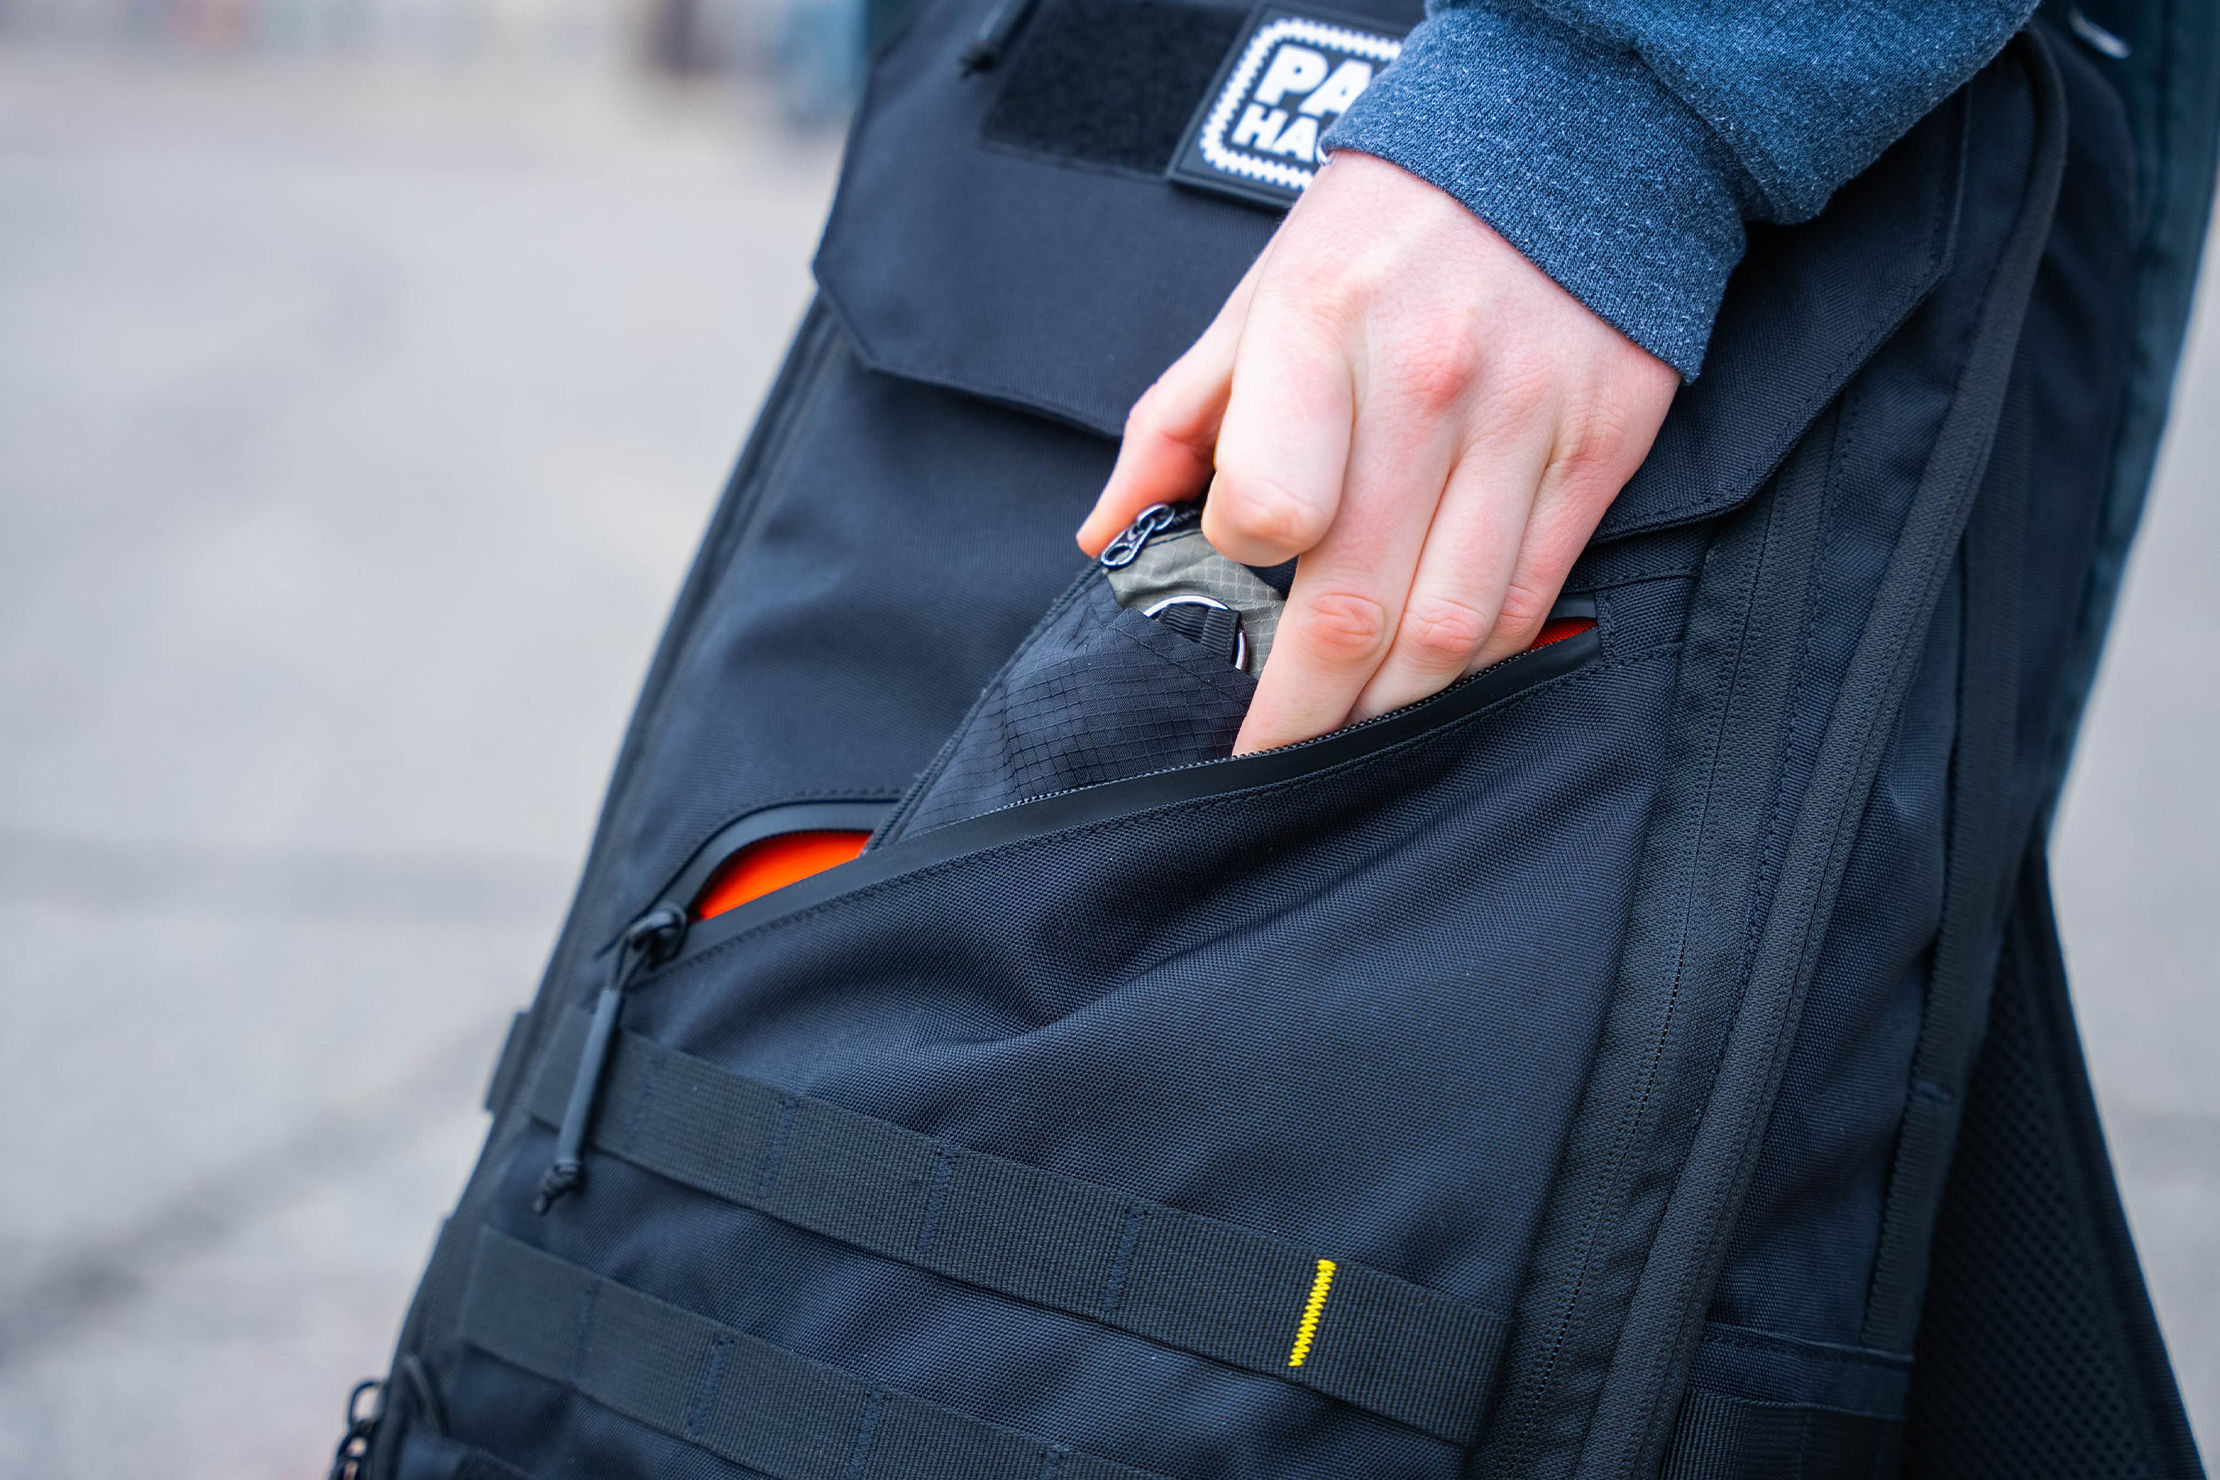 NITECORE BP23 Commuter Backpack In Use 2